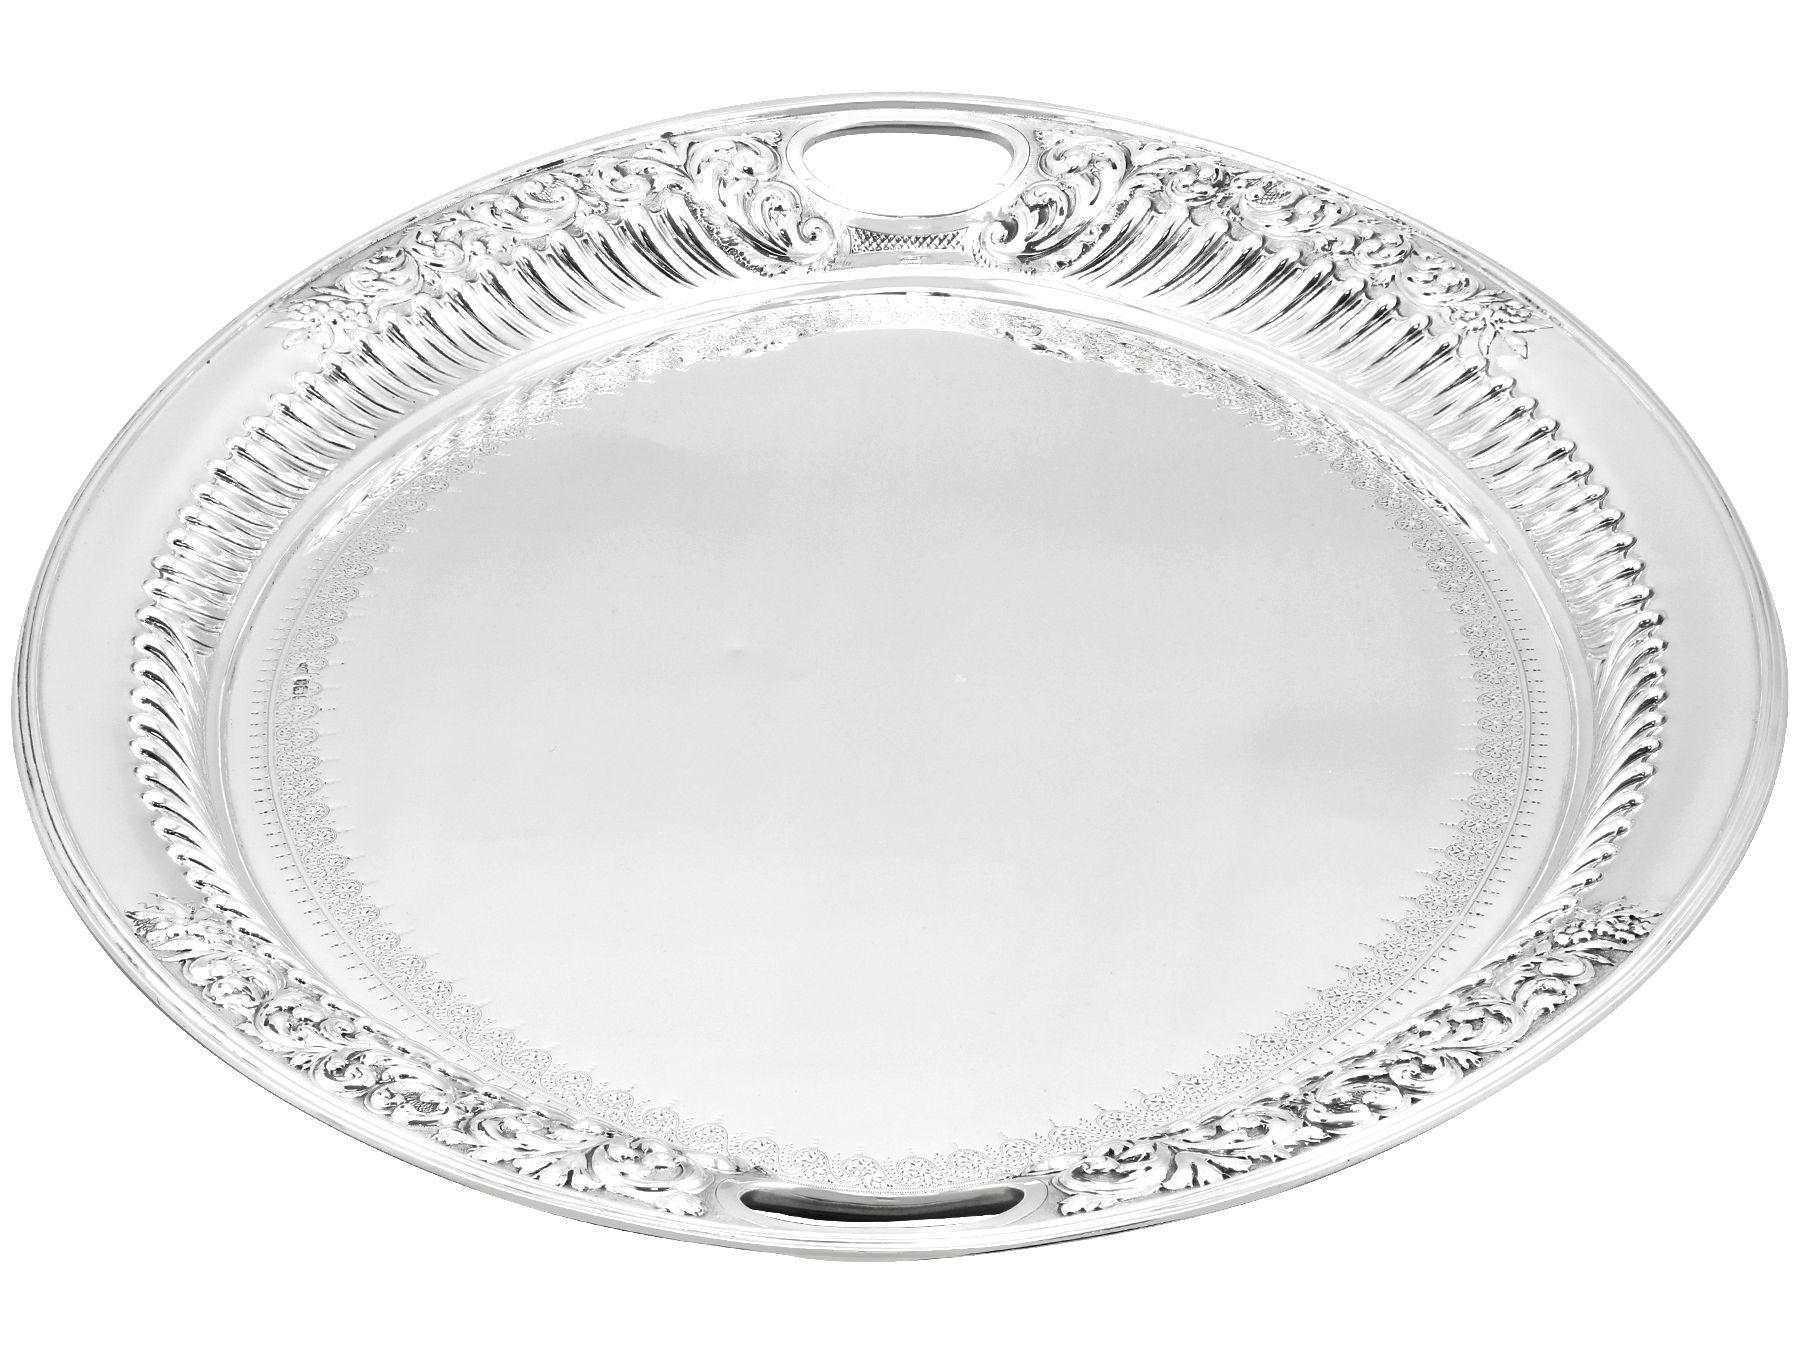 Antique Victorian Sterling Silver Galleried Tea Tray In Excellent Condition For Sale In Jesmond, Newcastle Upon Tyne